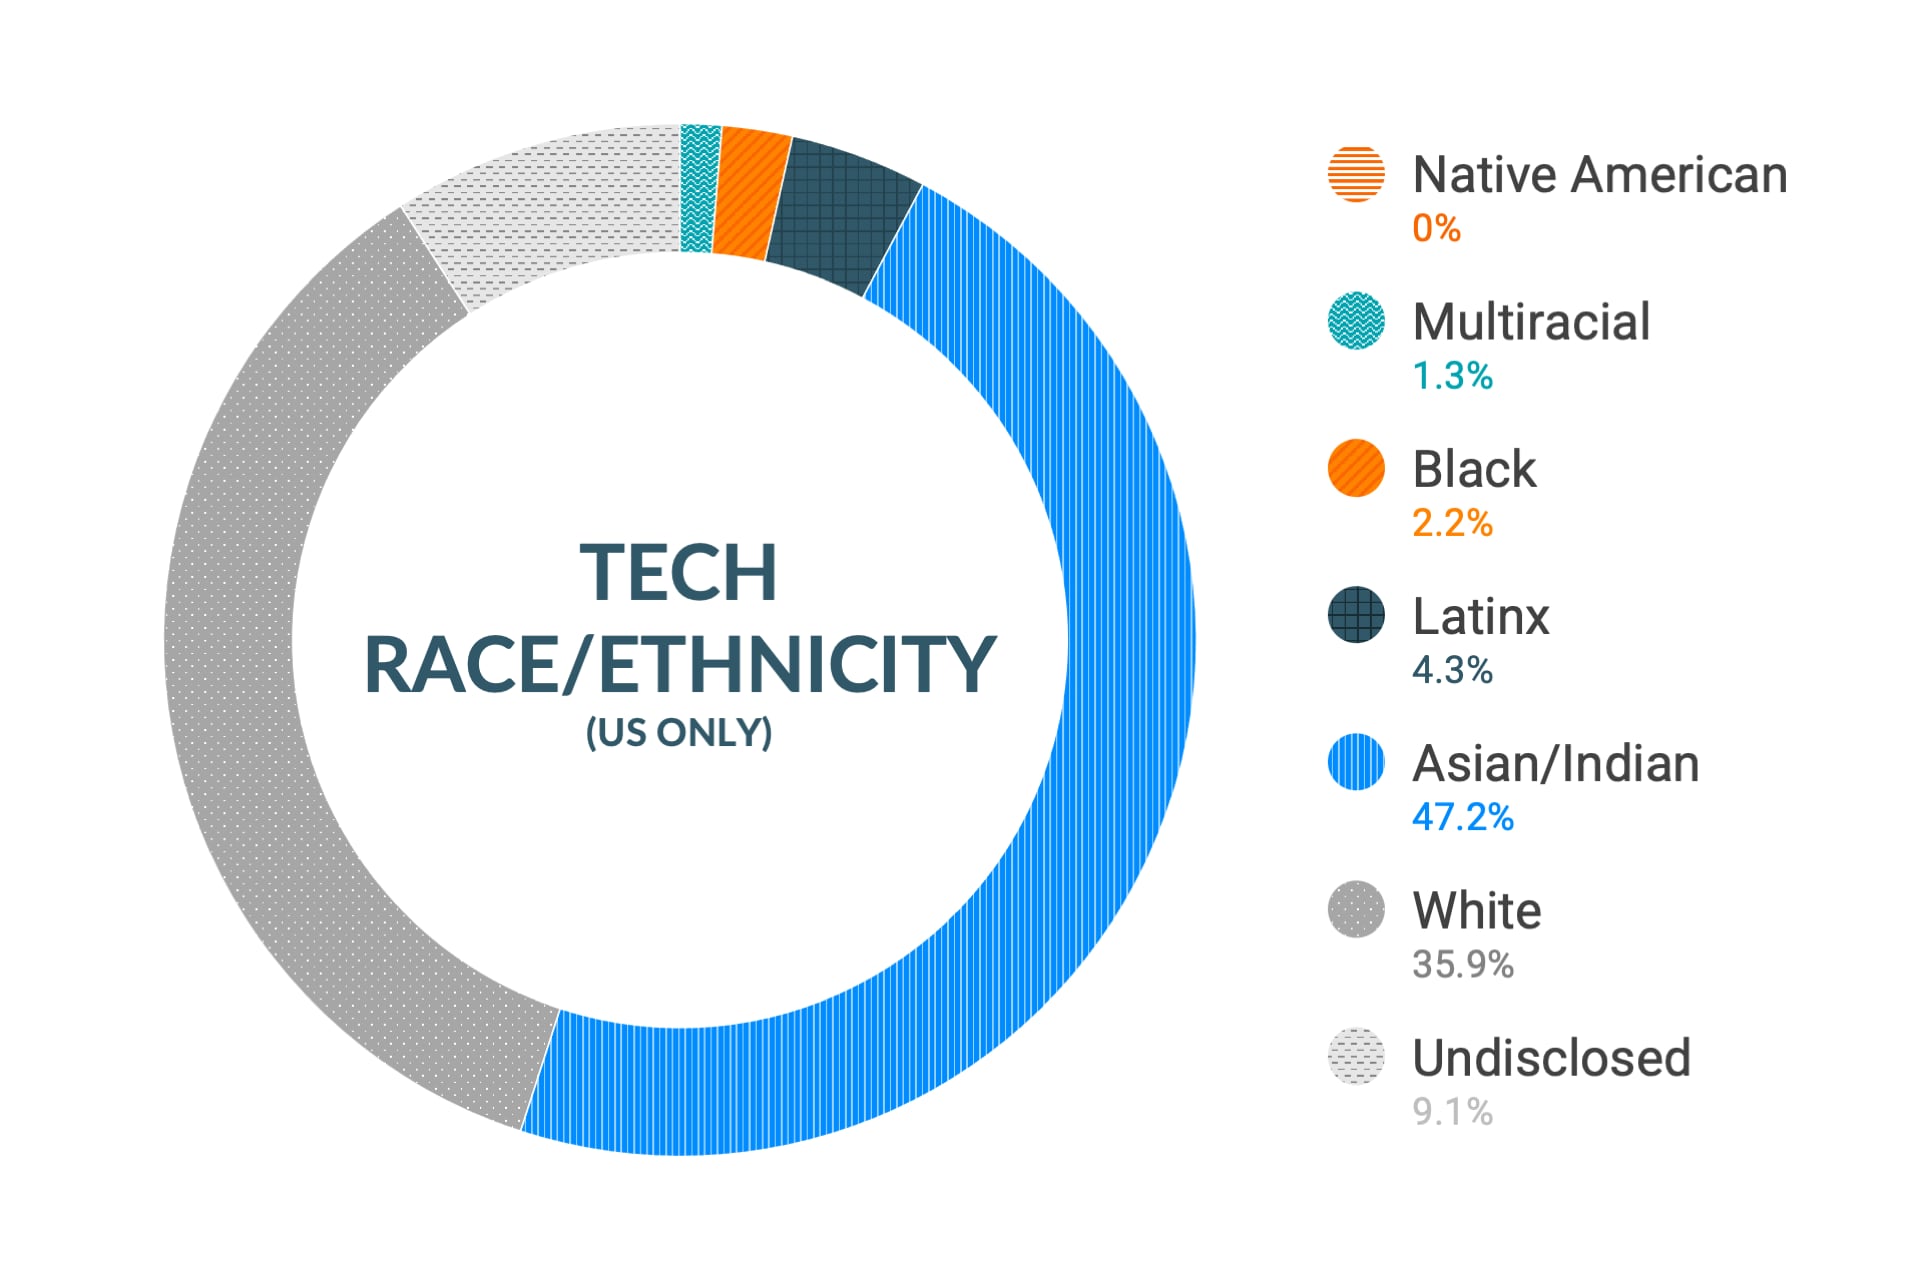 Cloudera Diversity and Inclusion data for Race and Ethnicity in U.S. Technical and Engineering Roles: Native American 0.4%, Multiracial 1.1%, Black 2.1%, Latinx 1.4%, Asian and Indian 45.5%, White 25.9%, Undisclosed 23.6%